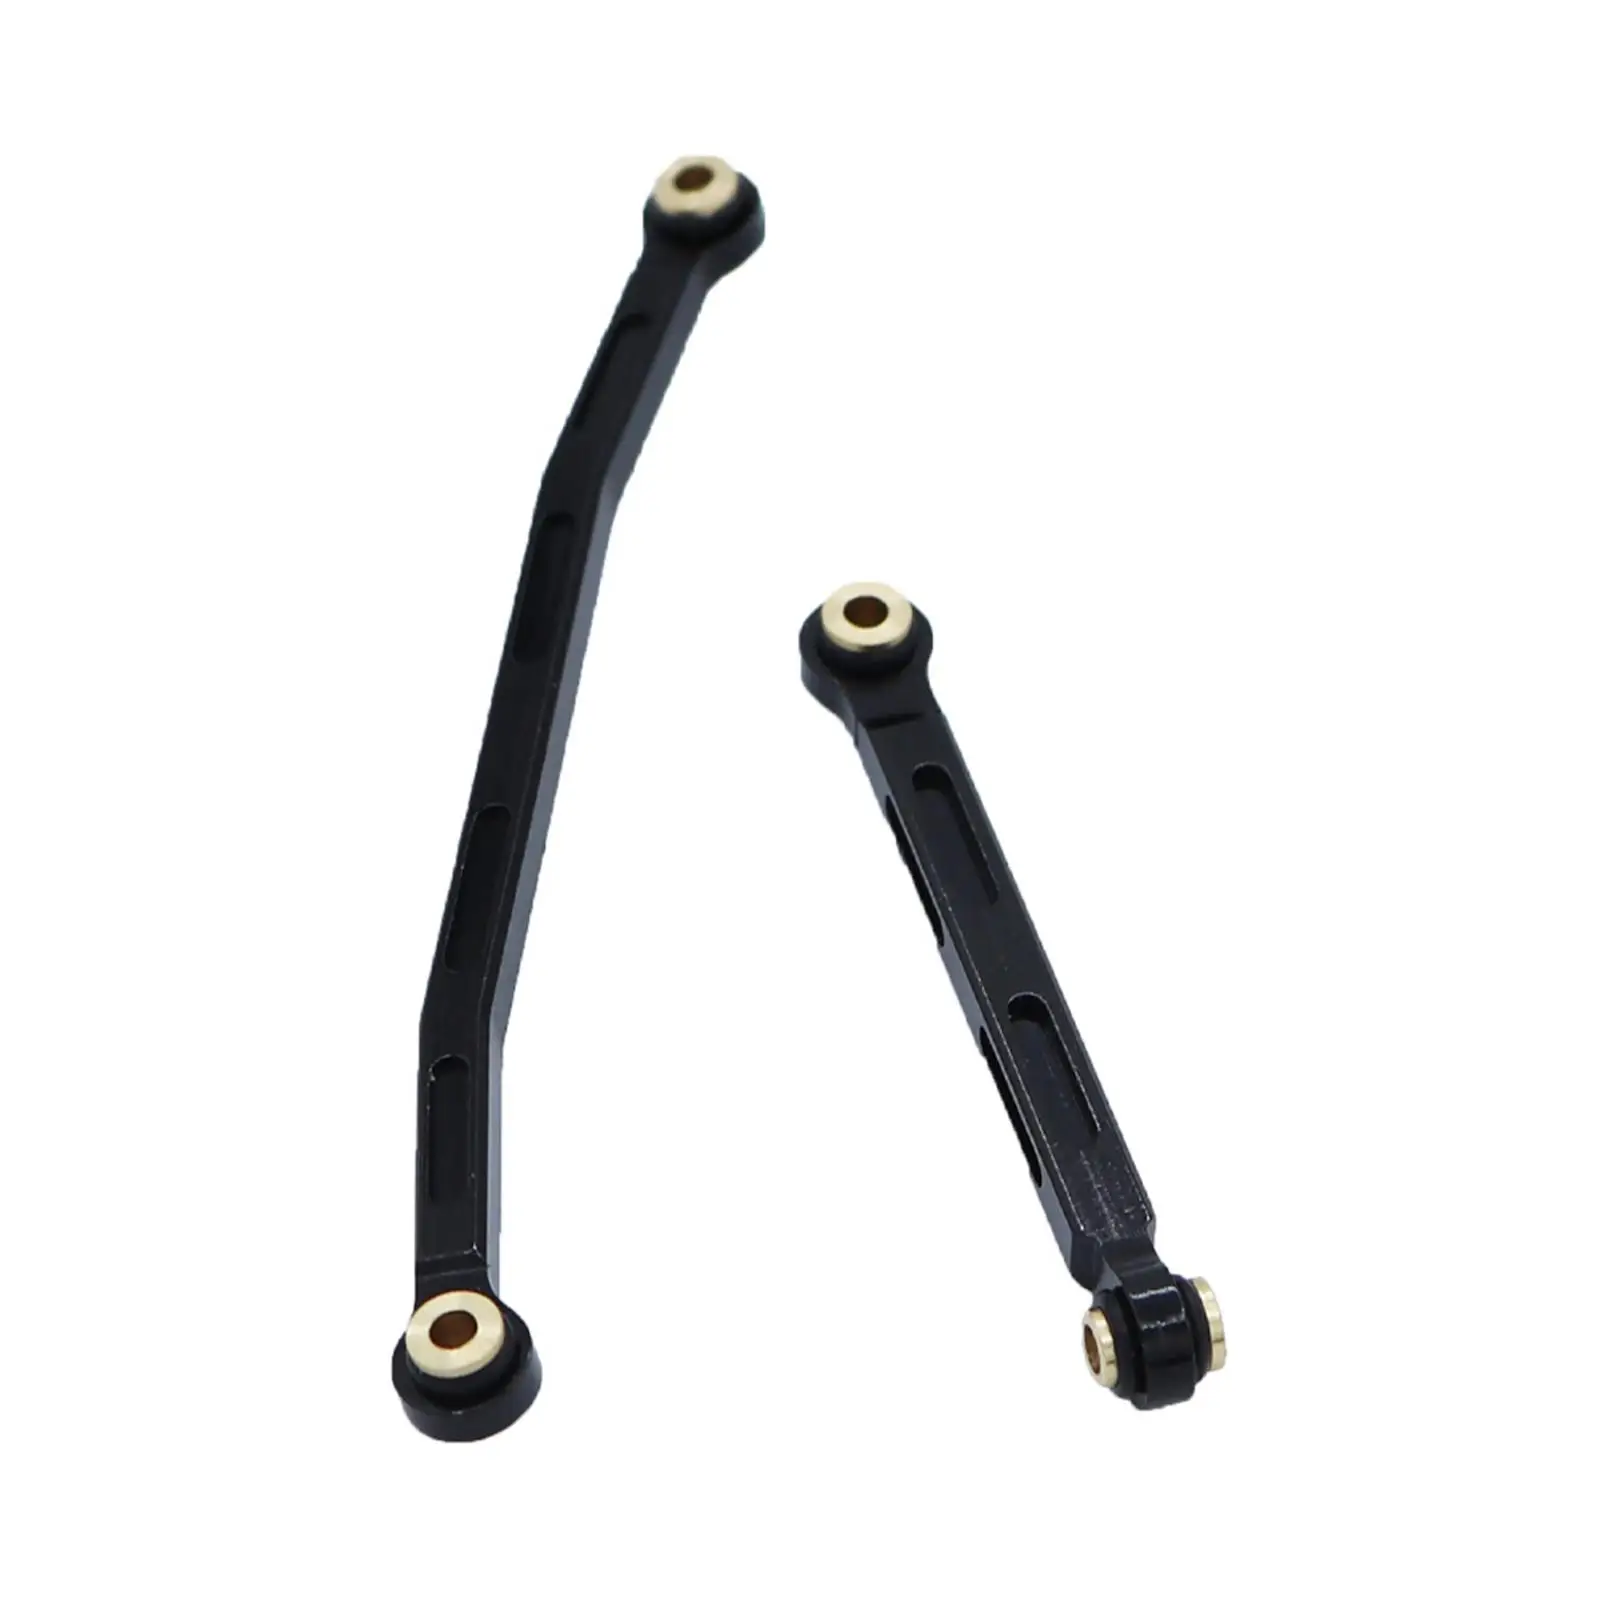 1:24 Steering Pull up Rod Aluminum Alloy Durable with Screws DIY Materials for Fcx24 RC Vehicle Accs Upgrade Parts Fitments